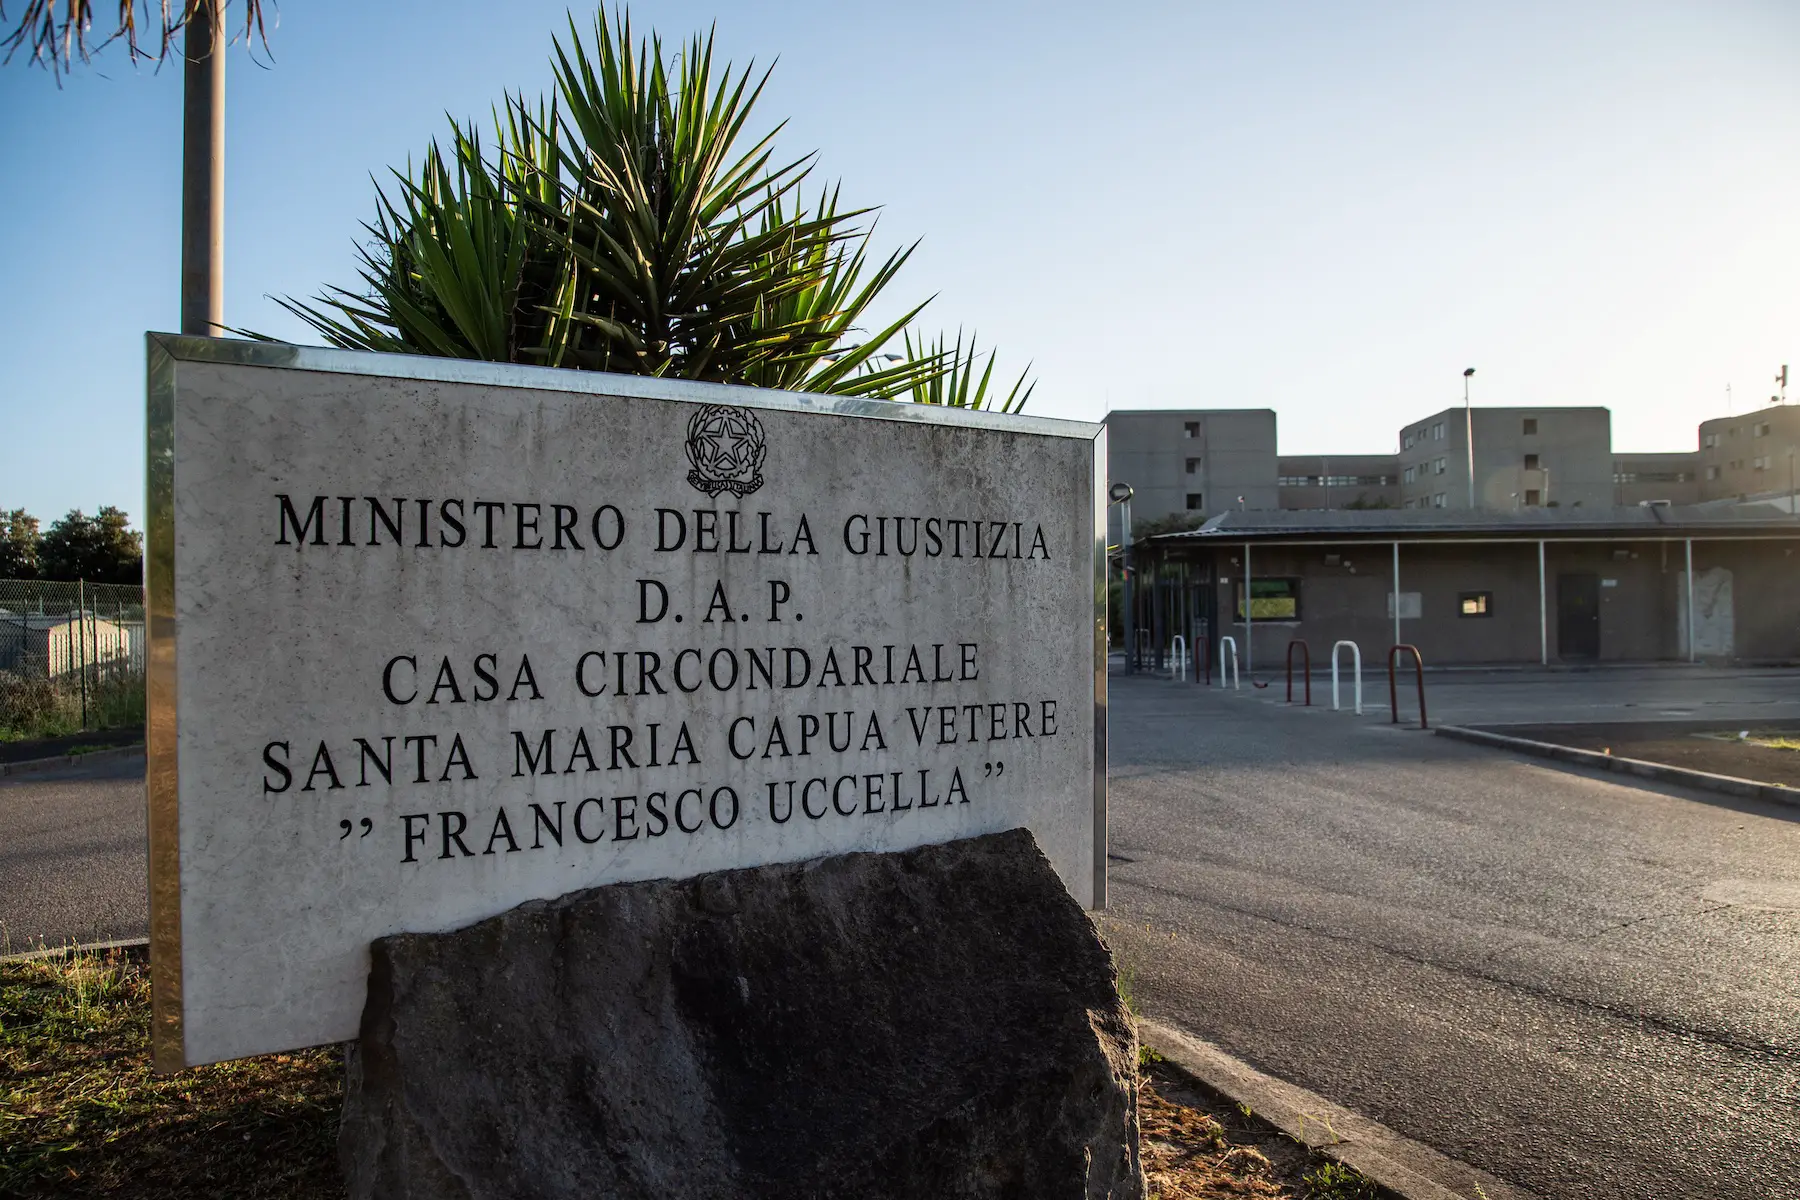 A large stone Ministry of Justice sign stands mounted on a rock in front of the Santa Maria Capua Vetere prison